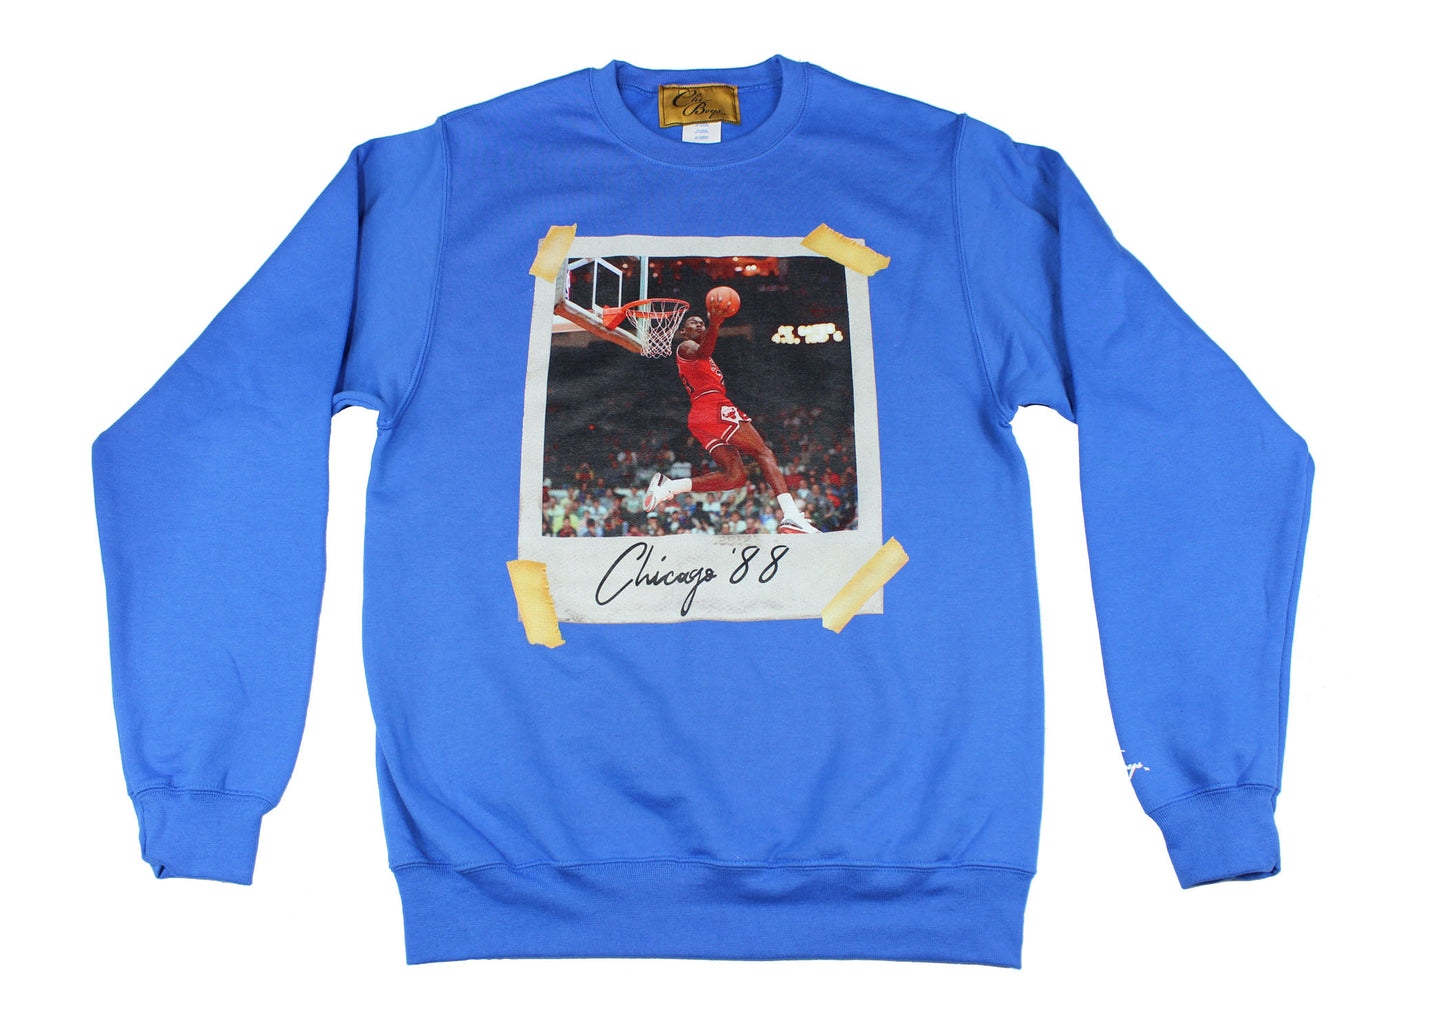 Chicago '88 Pay Homage (Blue)